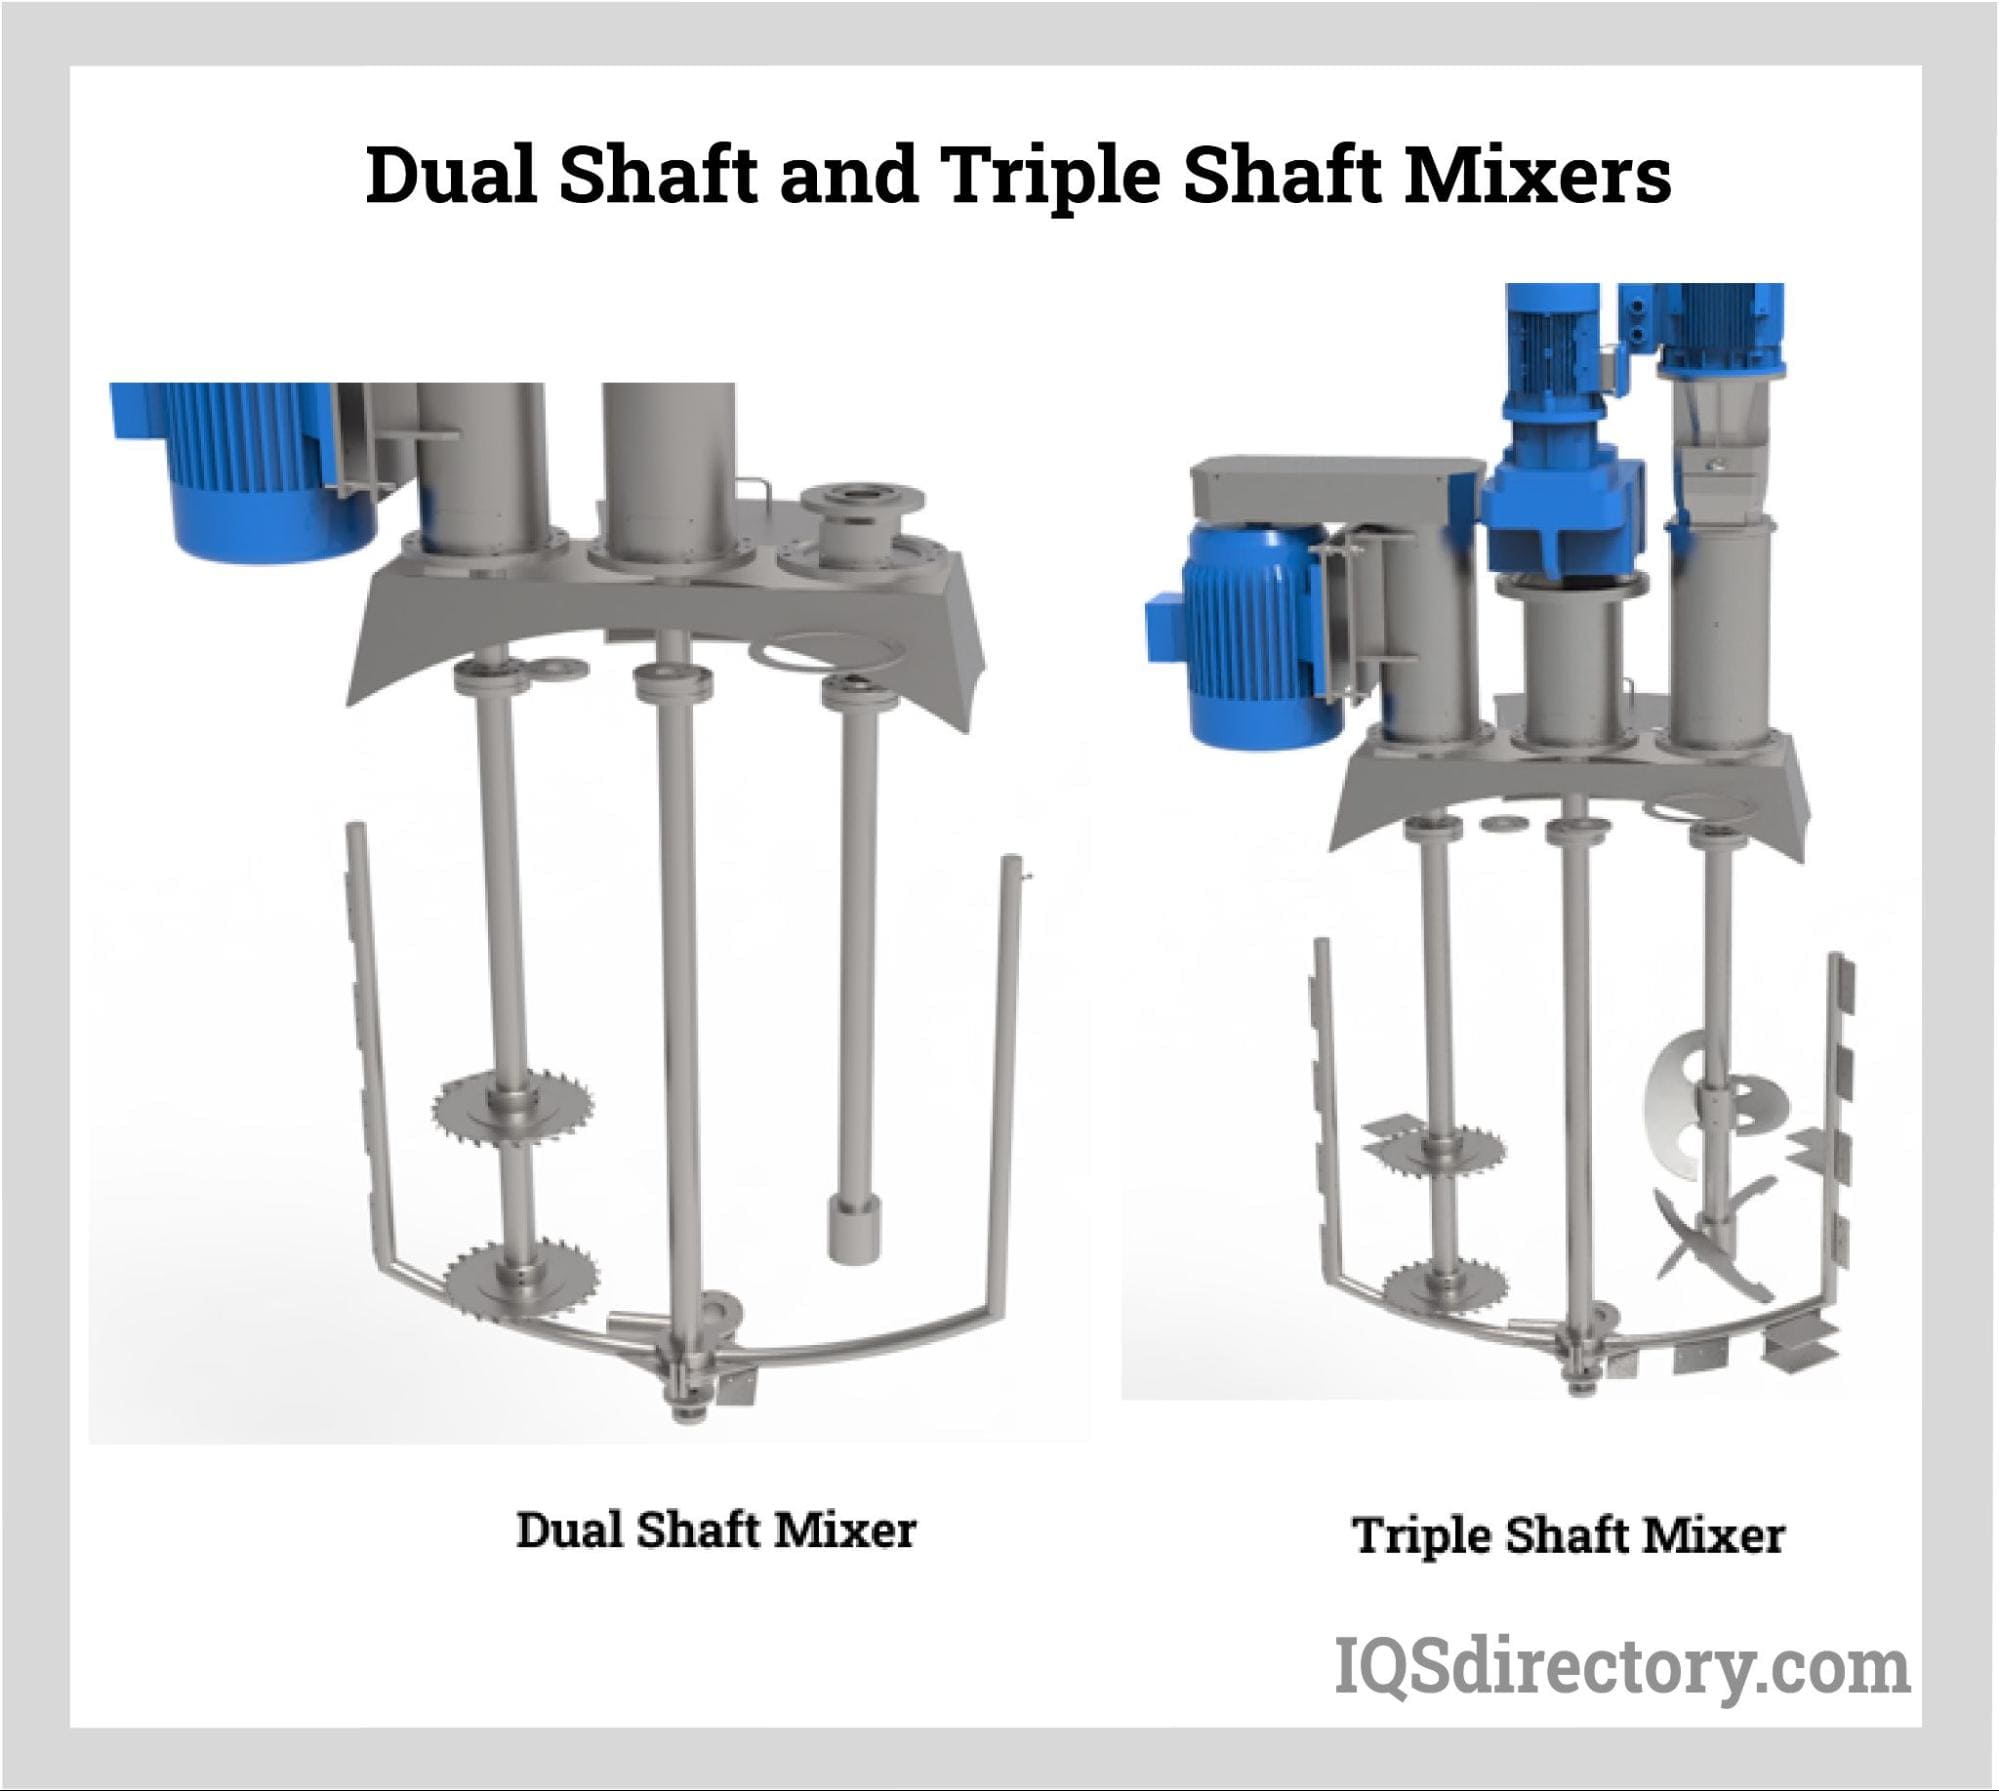 Dual Shaft and Triple Shaft Mixers